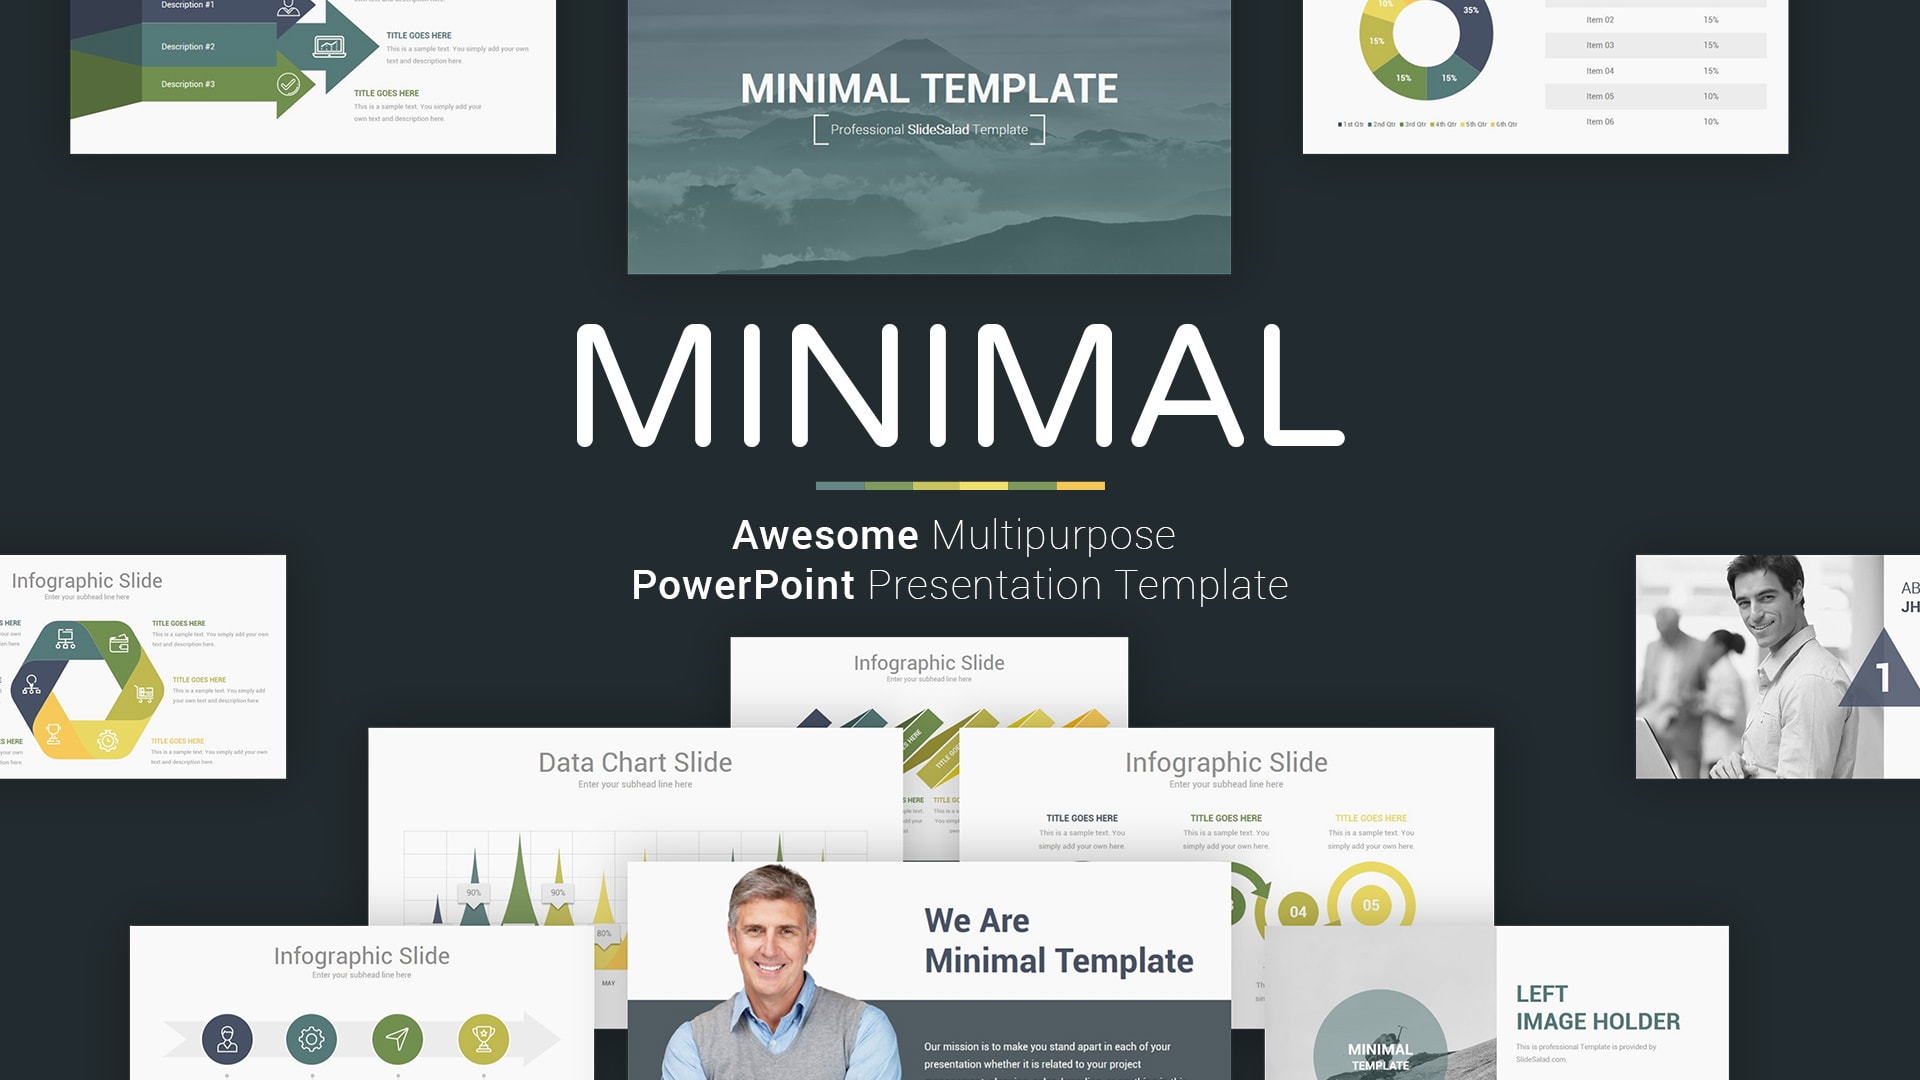 40 Minimalist Ppt Templates To Make Simple Modern Powerpoint Presentations In 2020 Slidesalad,Simple Kitchen And Bathroom Design